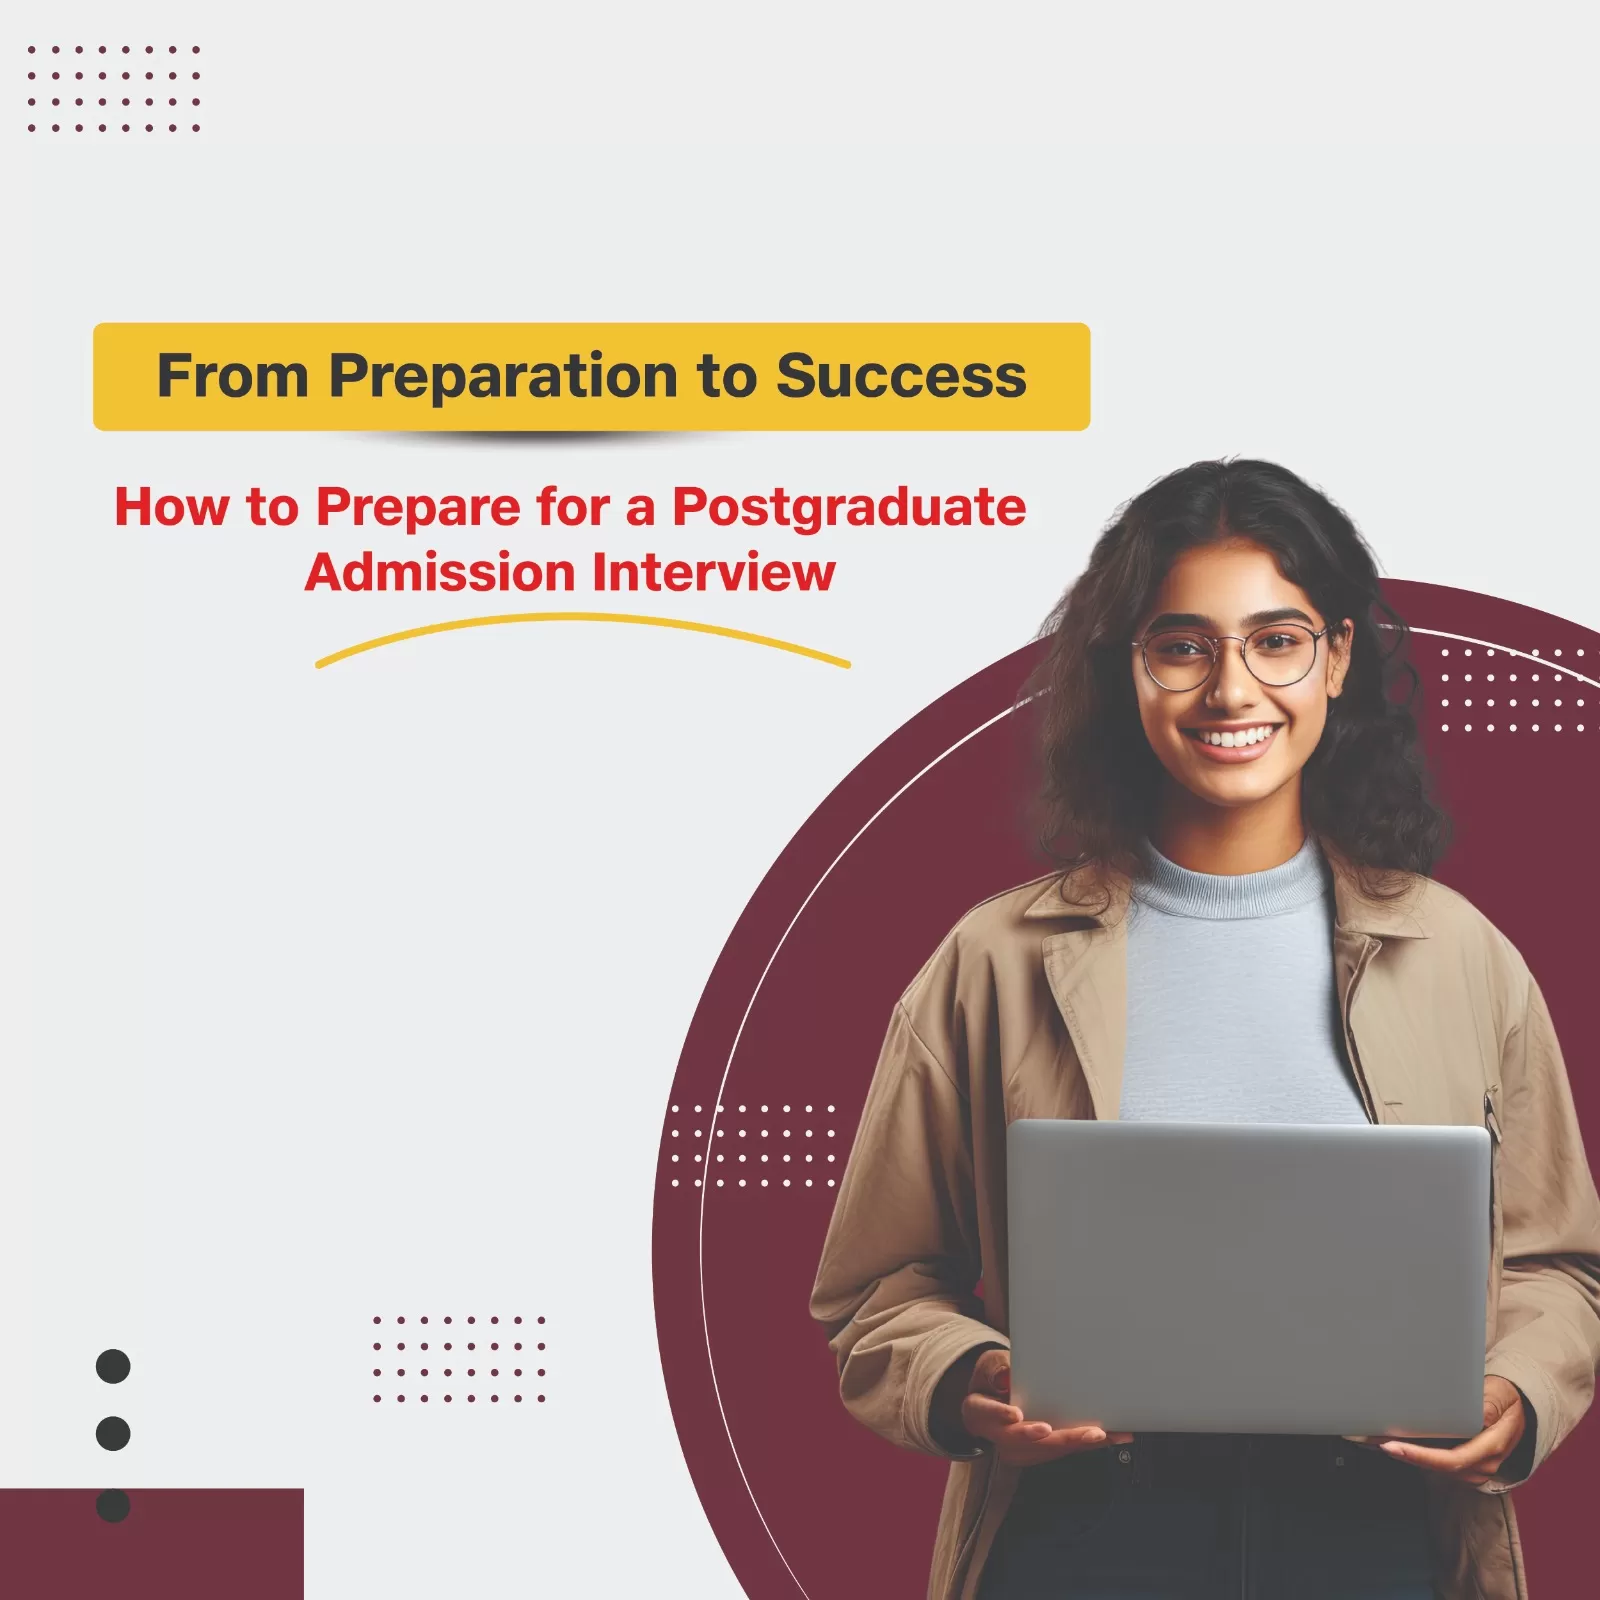 How to Prepare for a Postgraduate Admission Interview